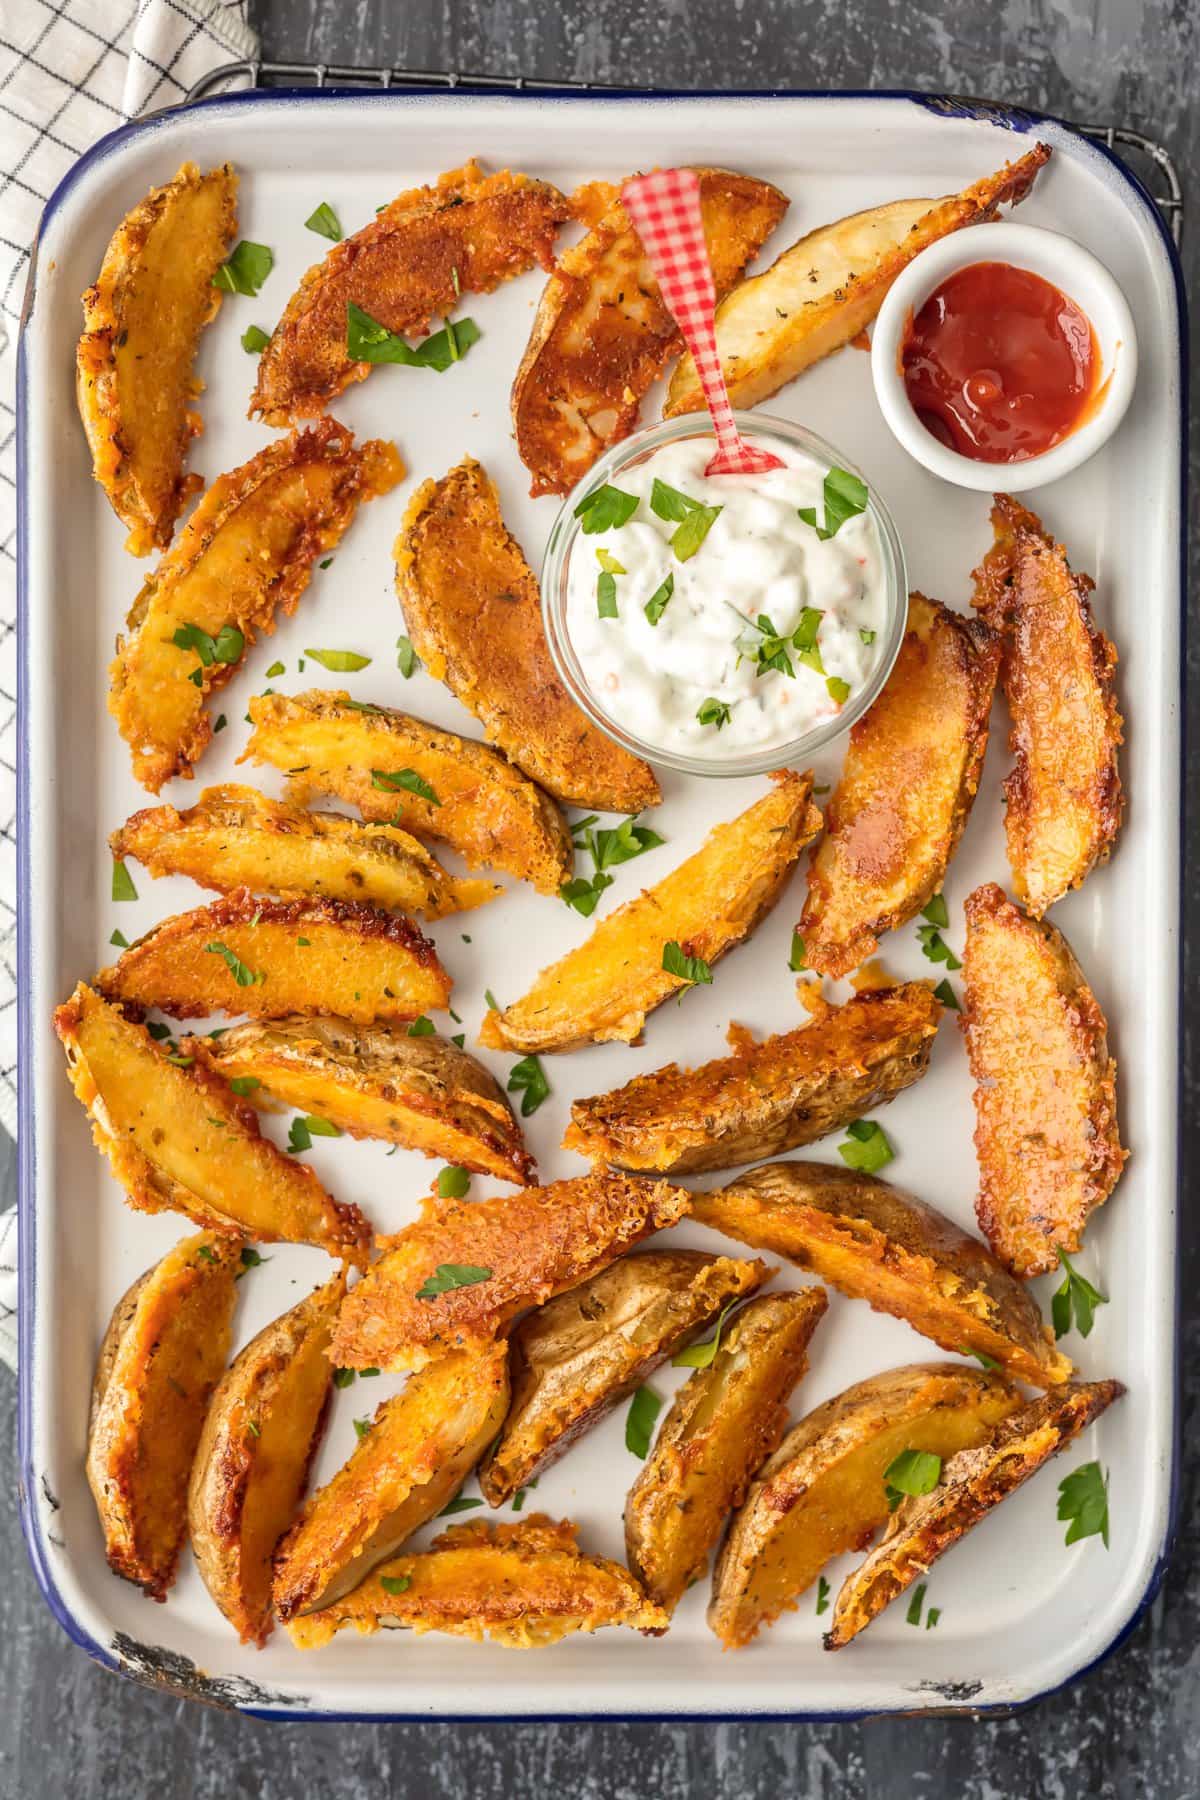 2-Minute Potato Seasoning for wedges, fries, & more